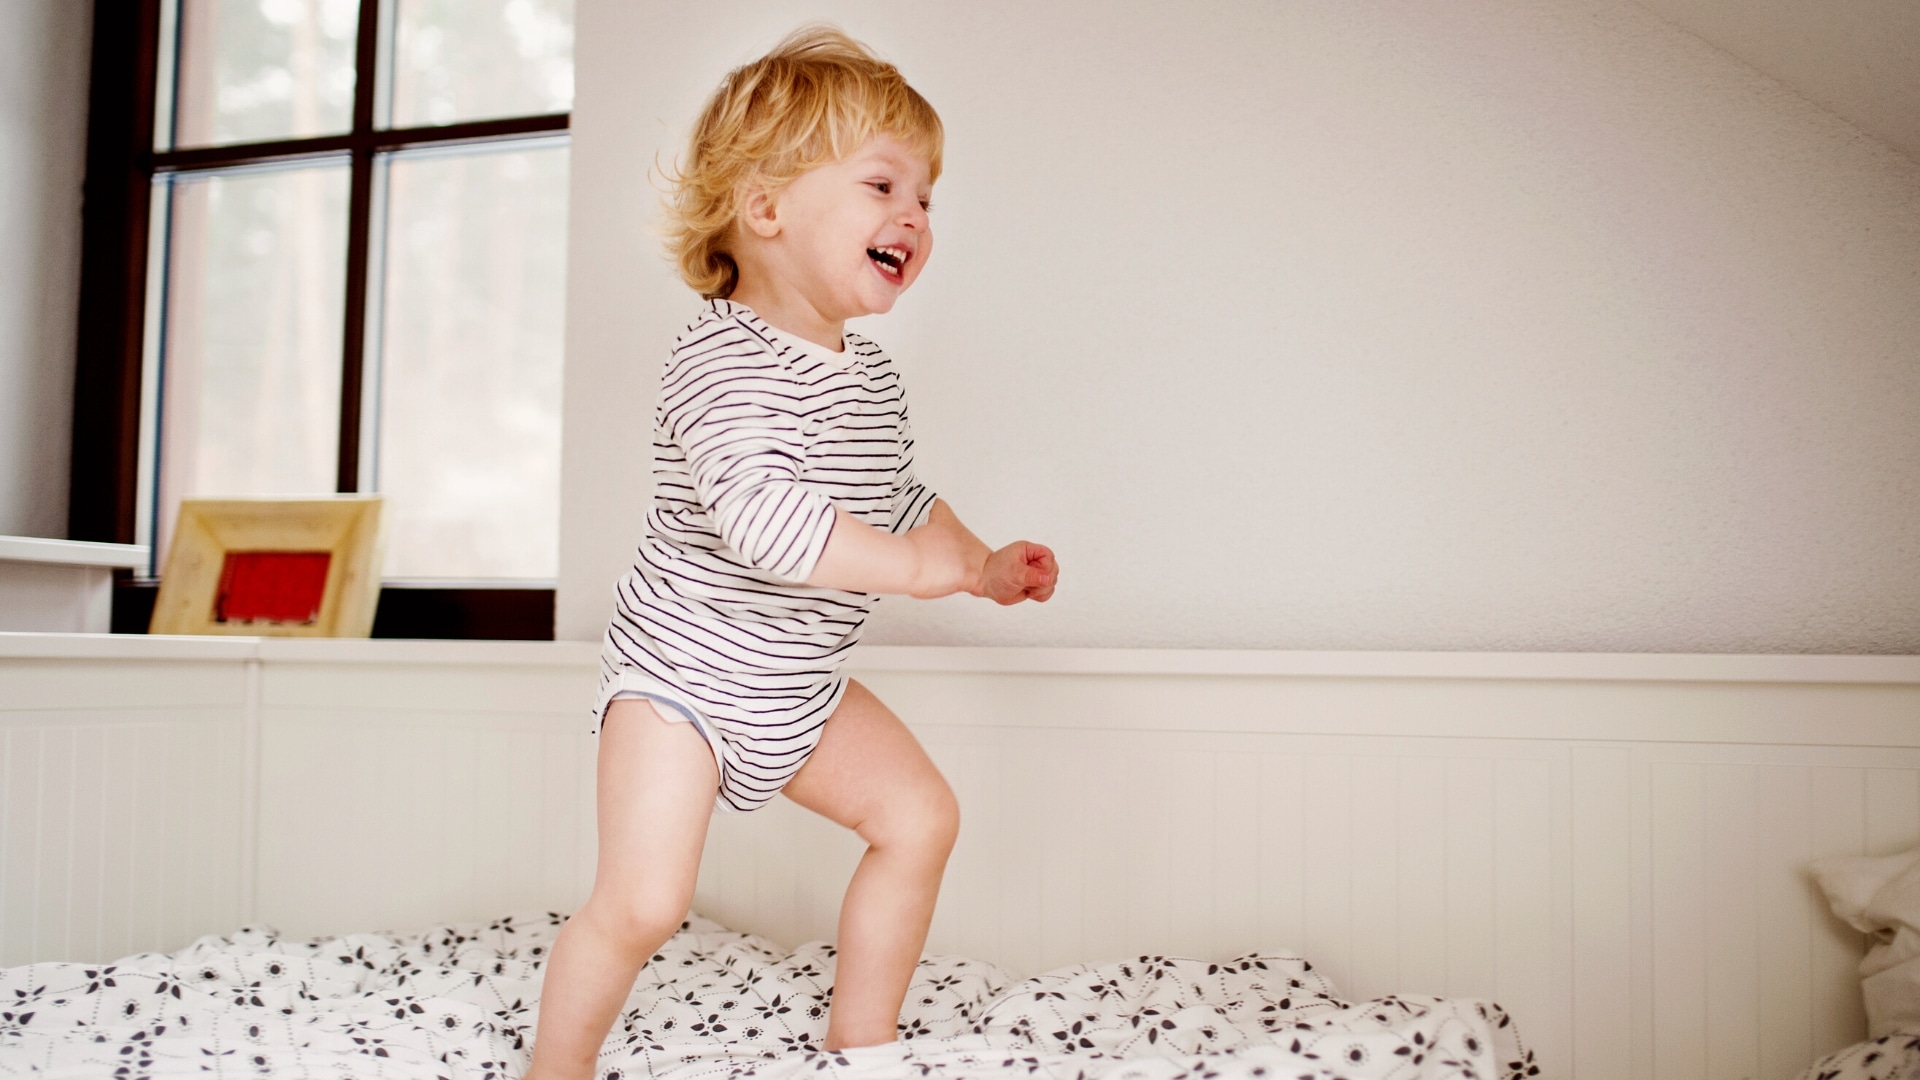 16 Top Tricks For When Your Toddler Keeps Getting Out of Bed